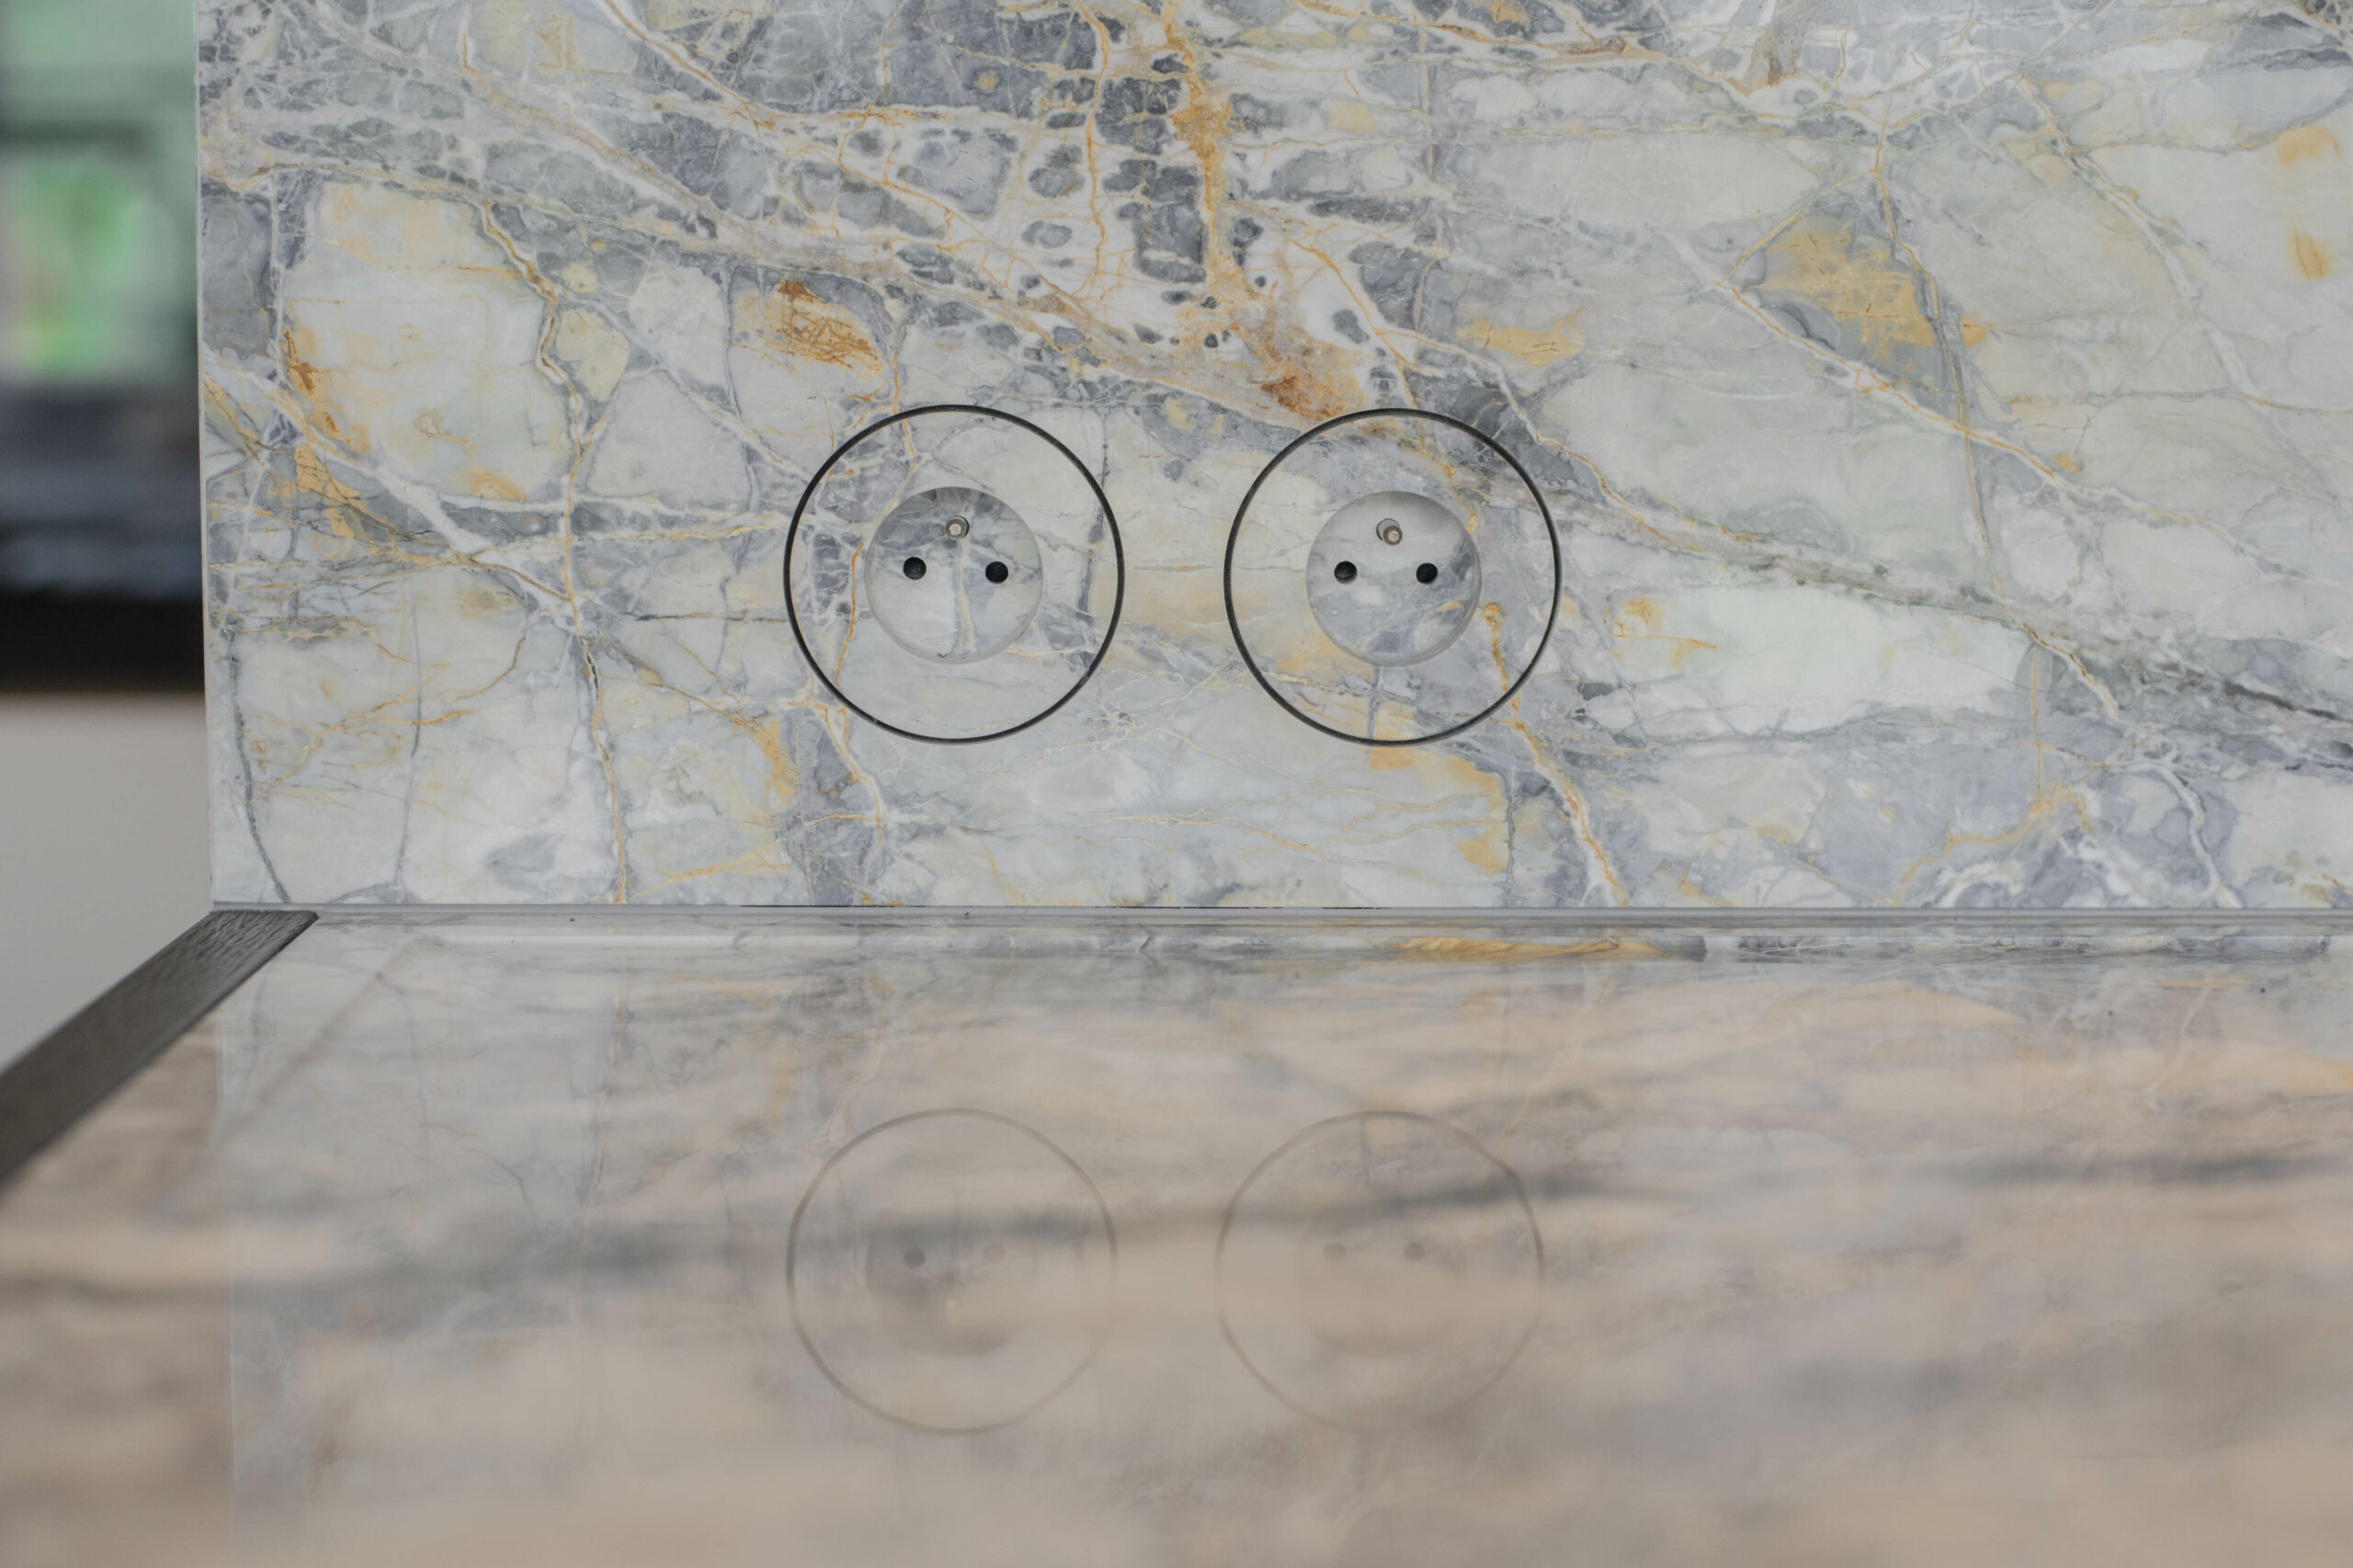 Marble backdrop with two electrical outlets circled, showing intricate patterns in the stone. The polished surface reflects a subtle image below.